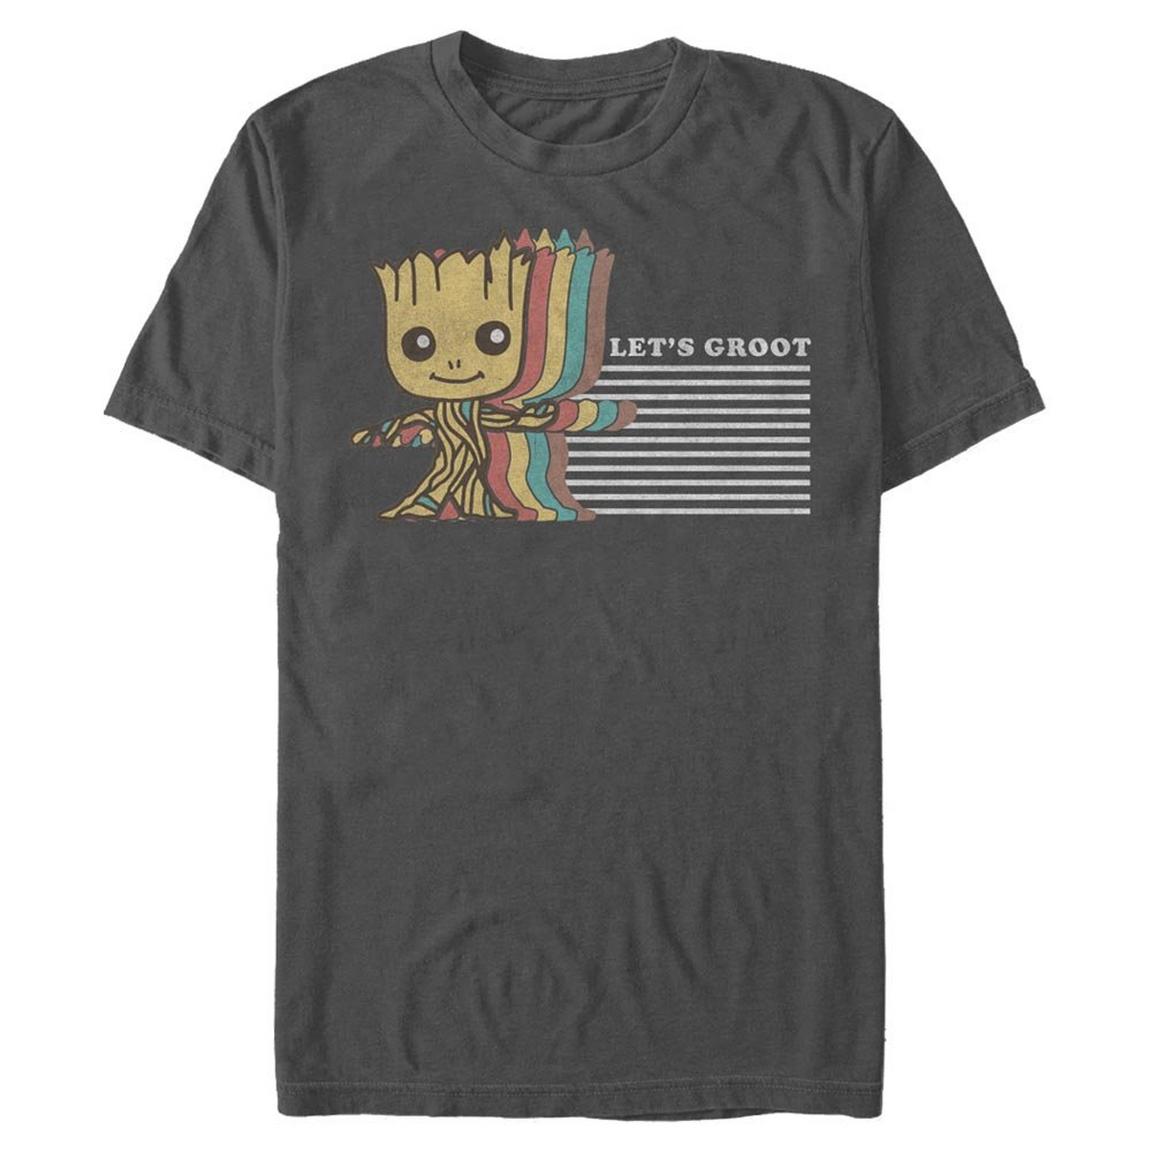 Marvel Guardians of the Galaxy Let's Groot Unisex T-Shirt, Size: Small, Fifth Sun